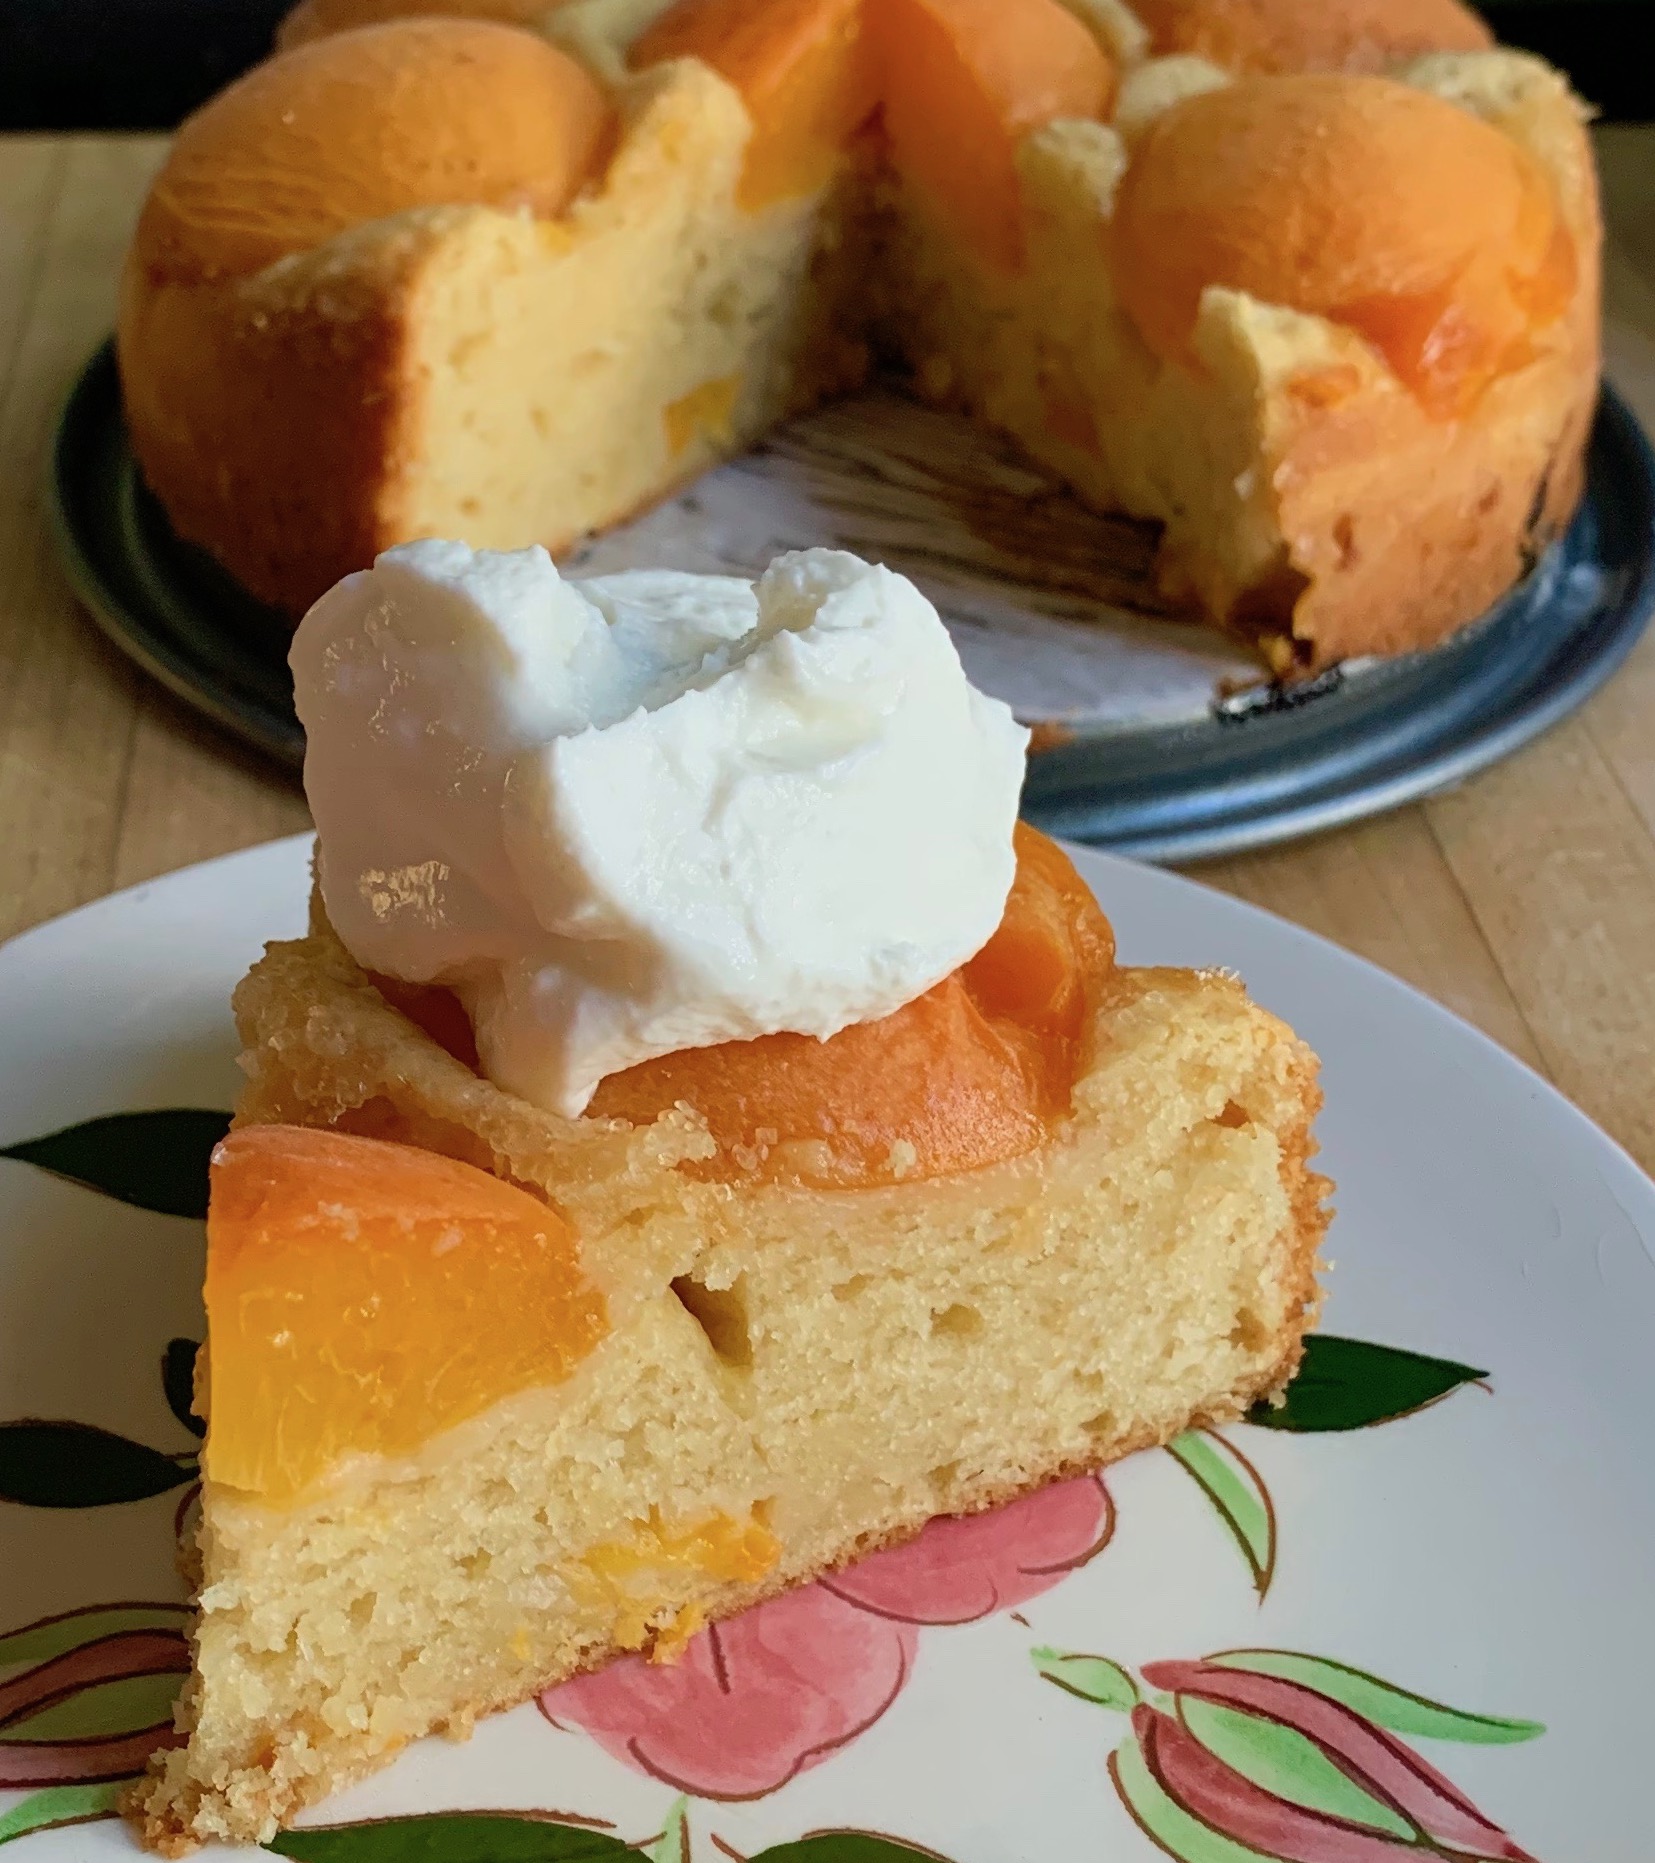 Austrian Apricot Cake Recipe - Made with Grapeseed Oil